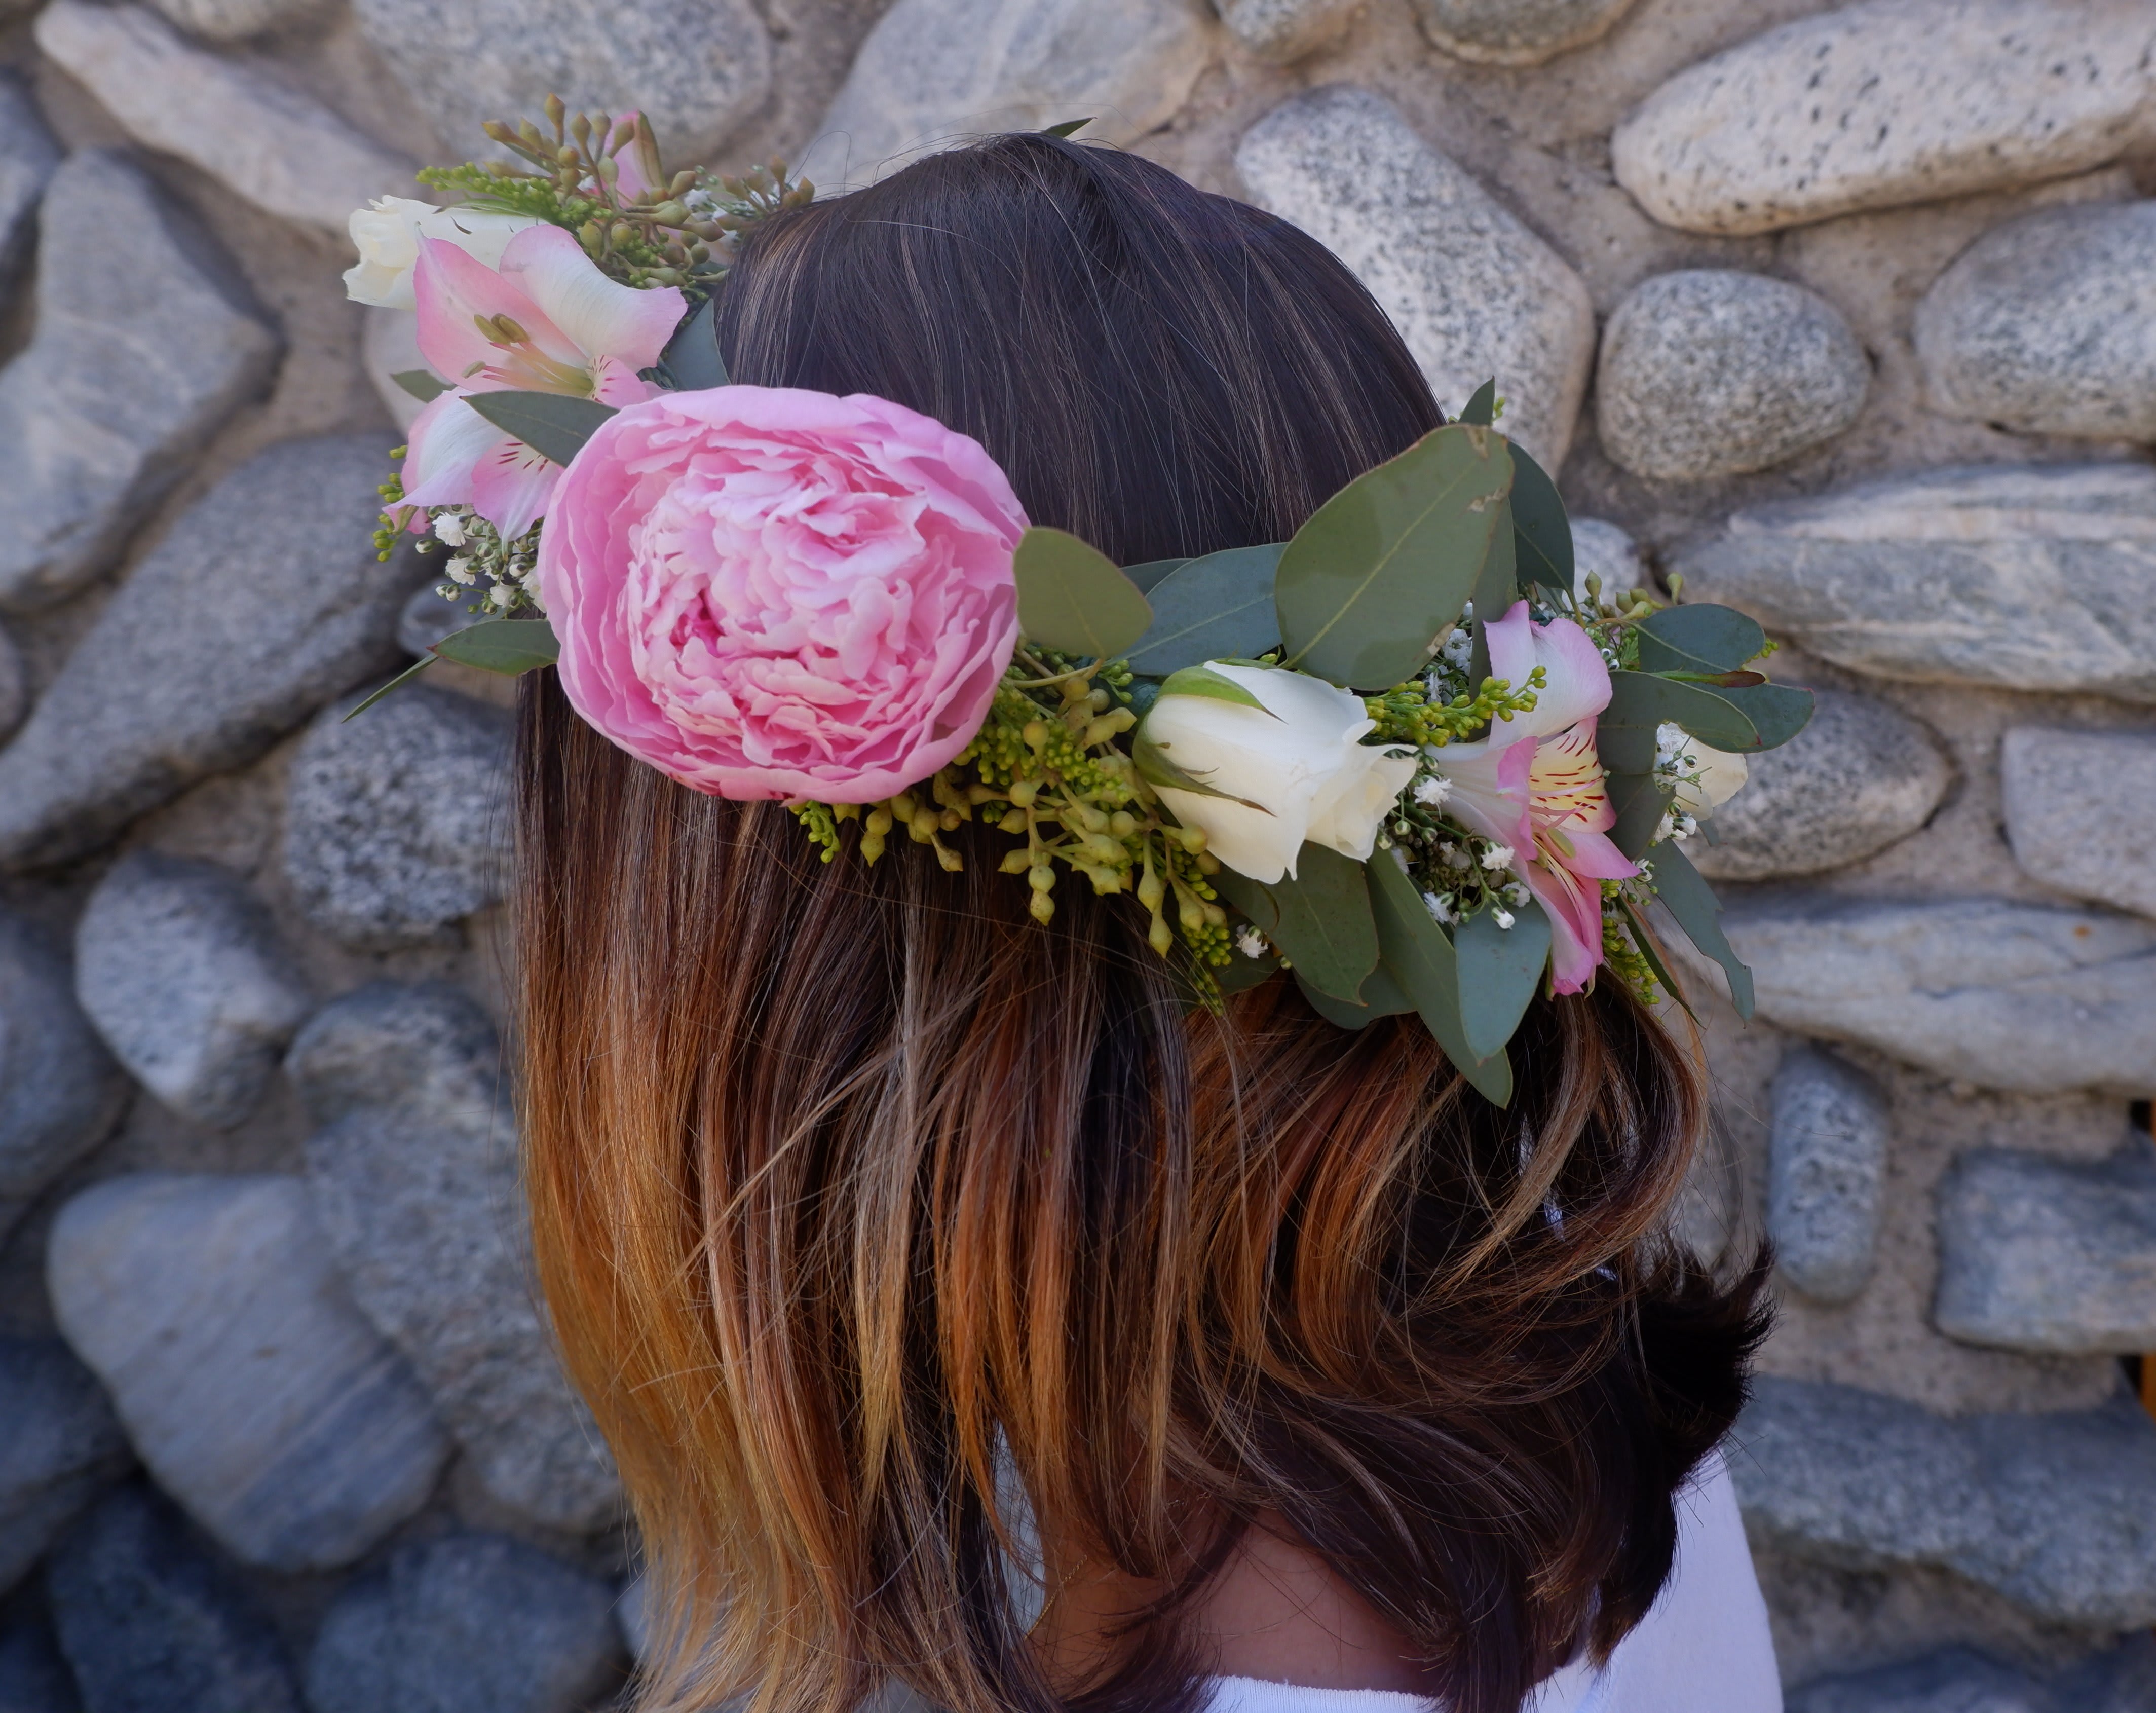 where to find a flower crown